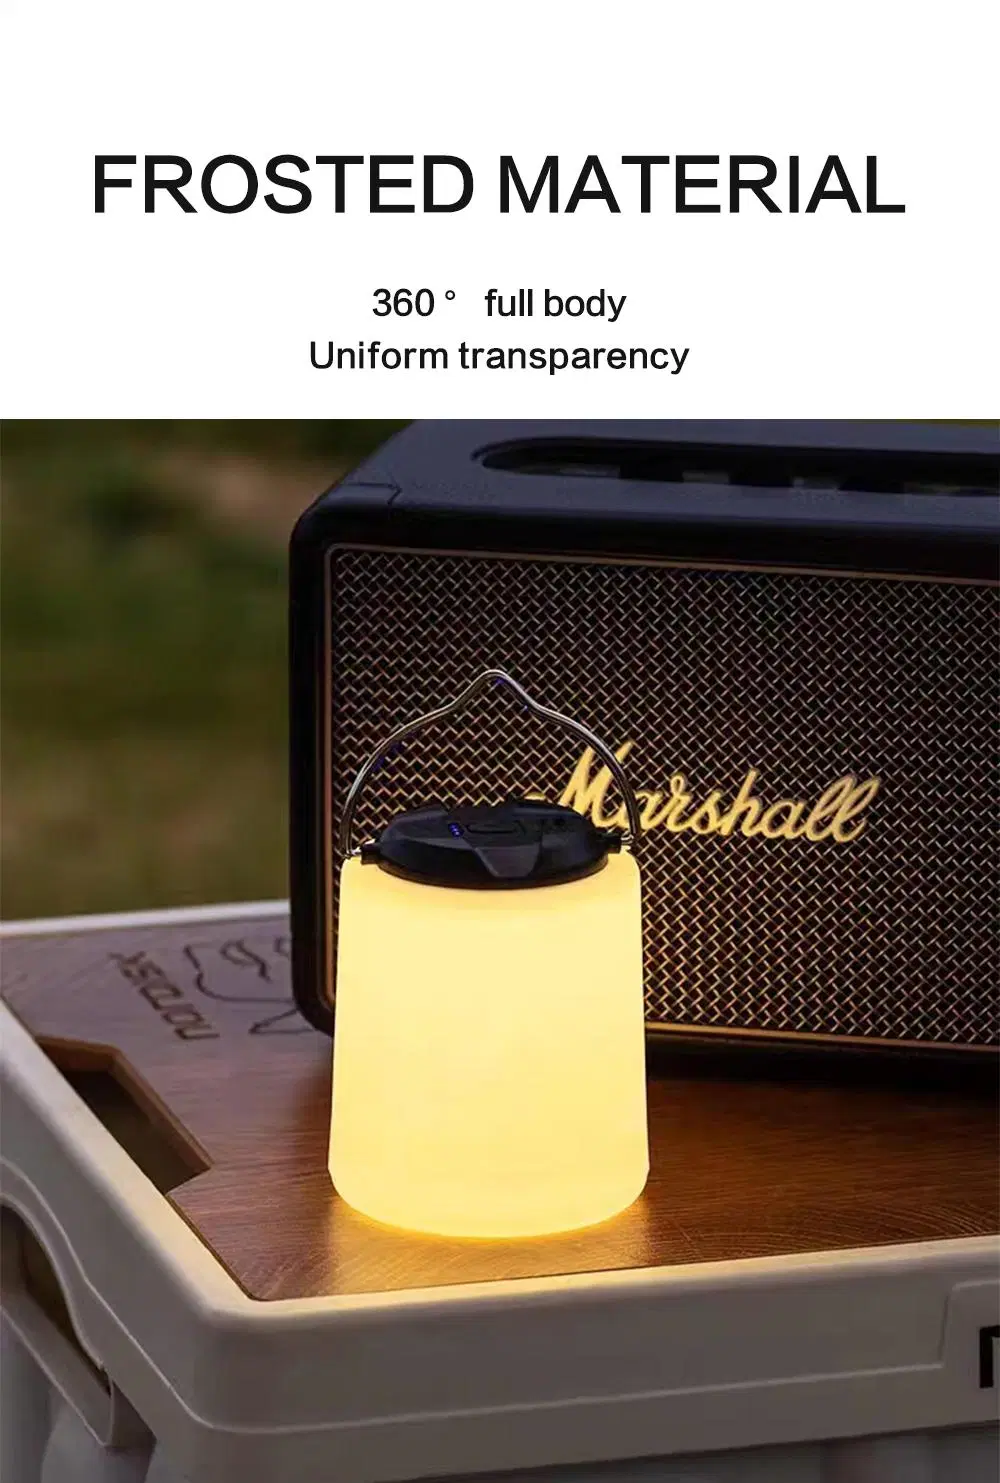 Goldmore4 3W LED Outdoor Decorative Emergency Mini Camping Light with Hook Waterproof Rechargeable Camp Tent Light 3 Mode